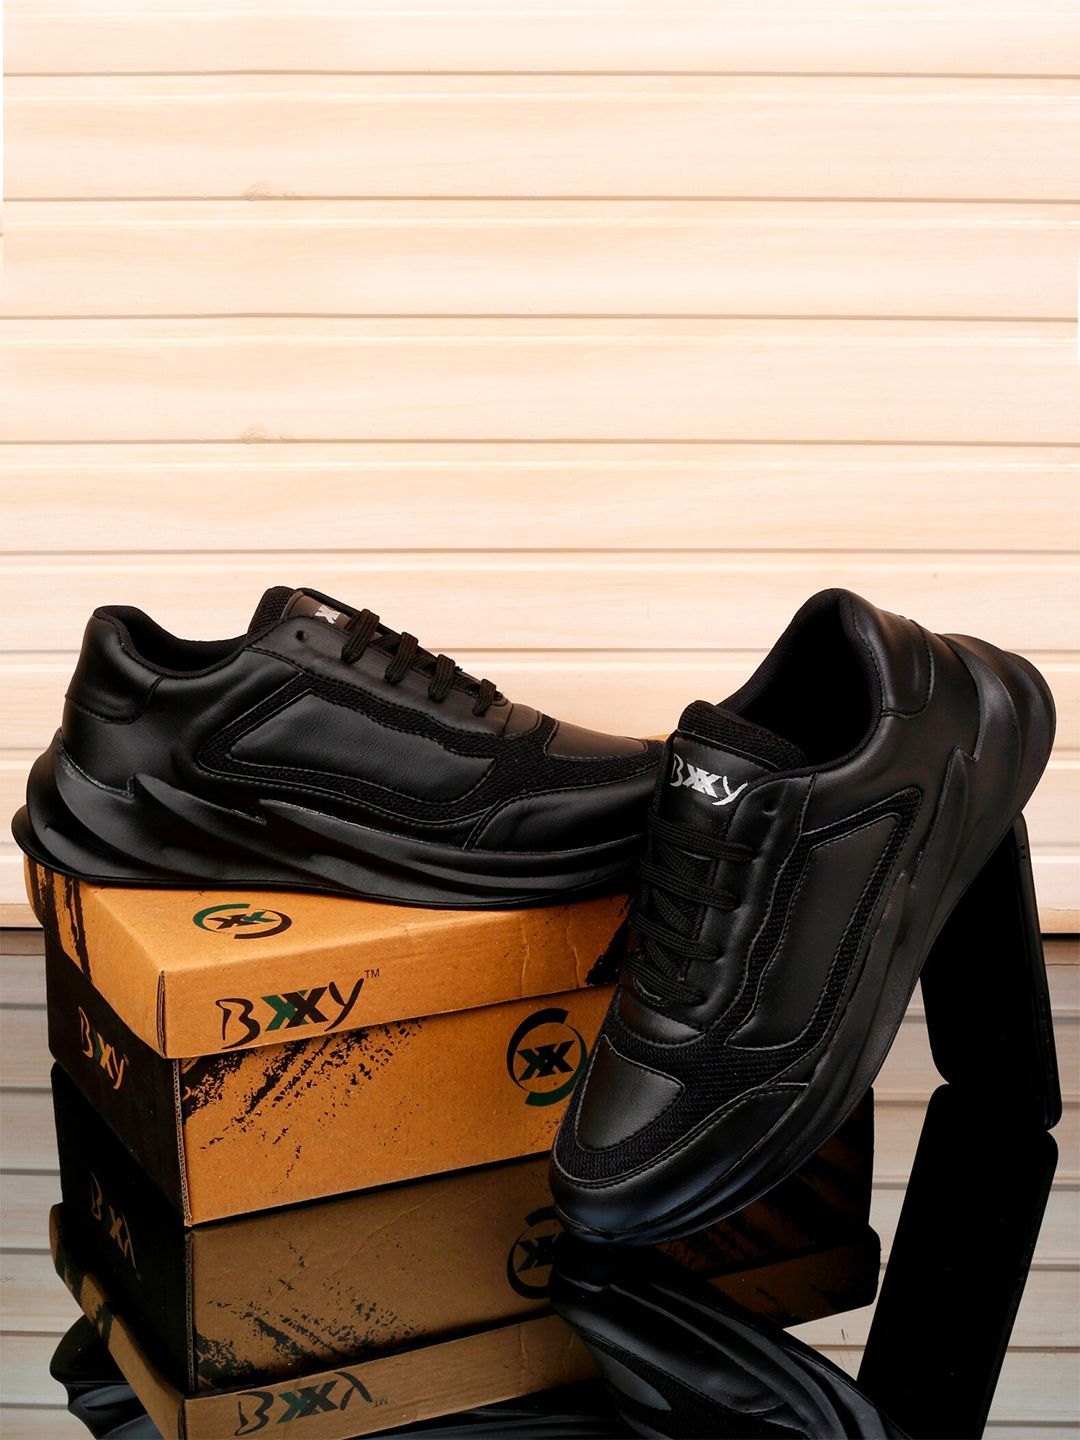 Bxxy Men Lace Up Running Shoes